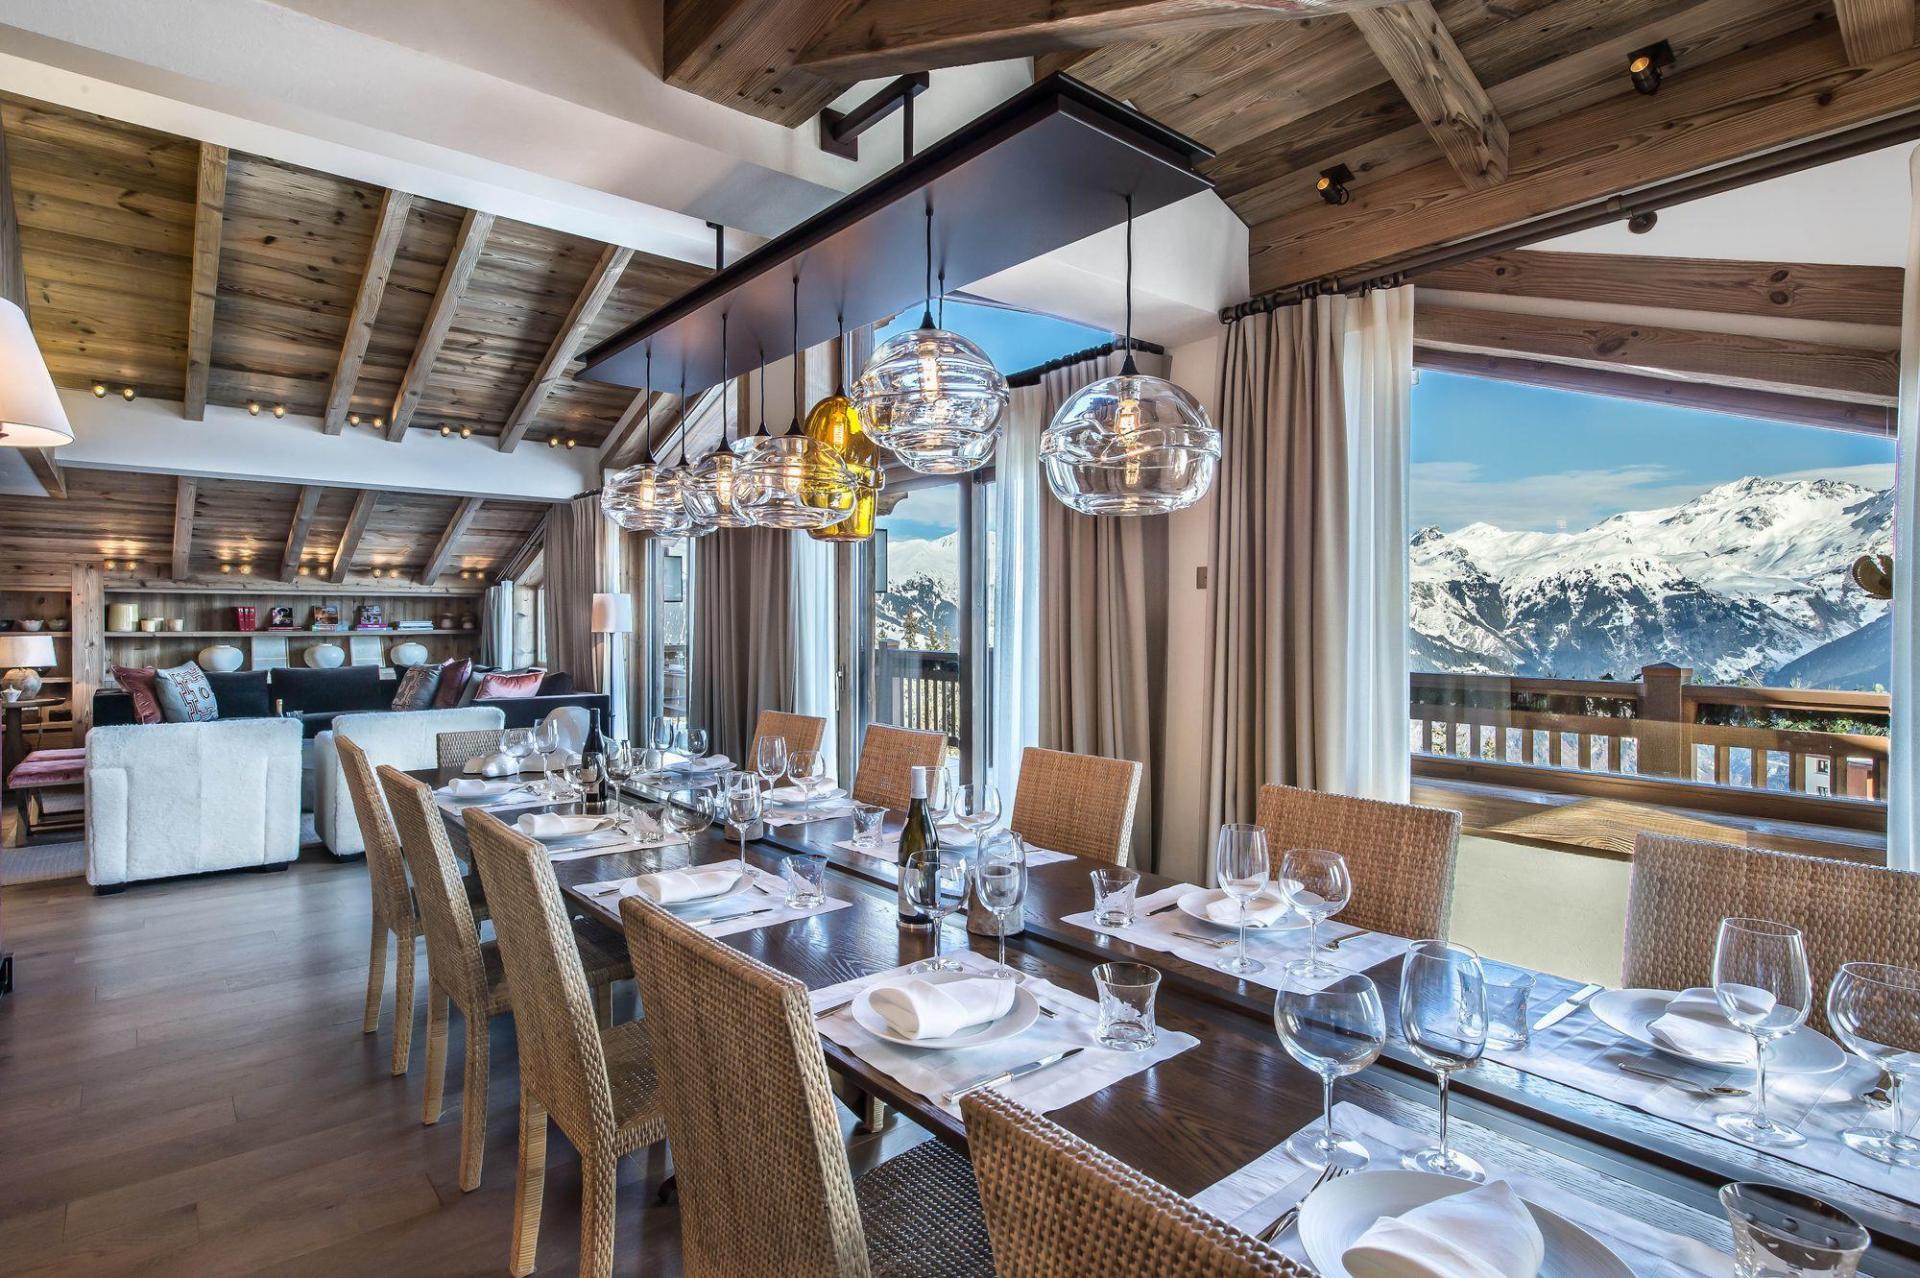 SPECTACULAR MOUNTAIN VIEWS FROM THE DINING ROOM IN CHALET DES CHENUS